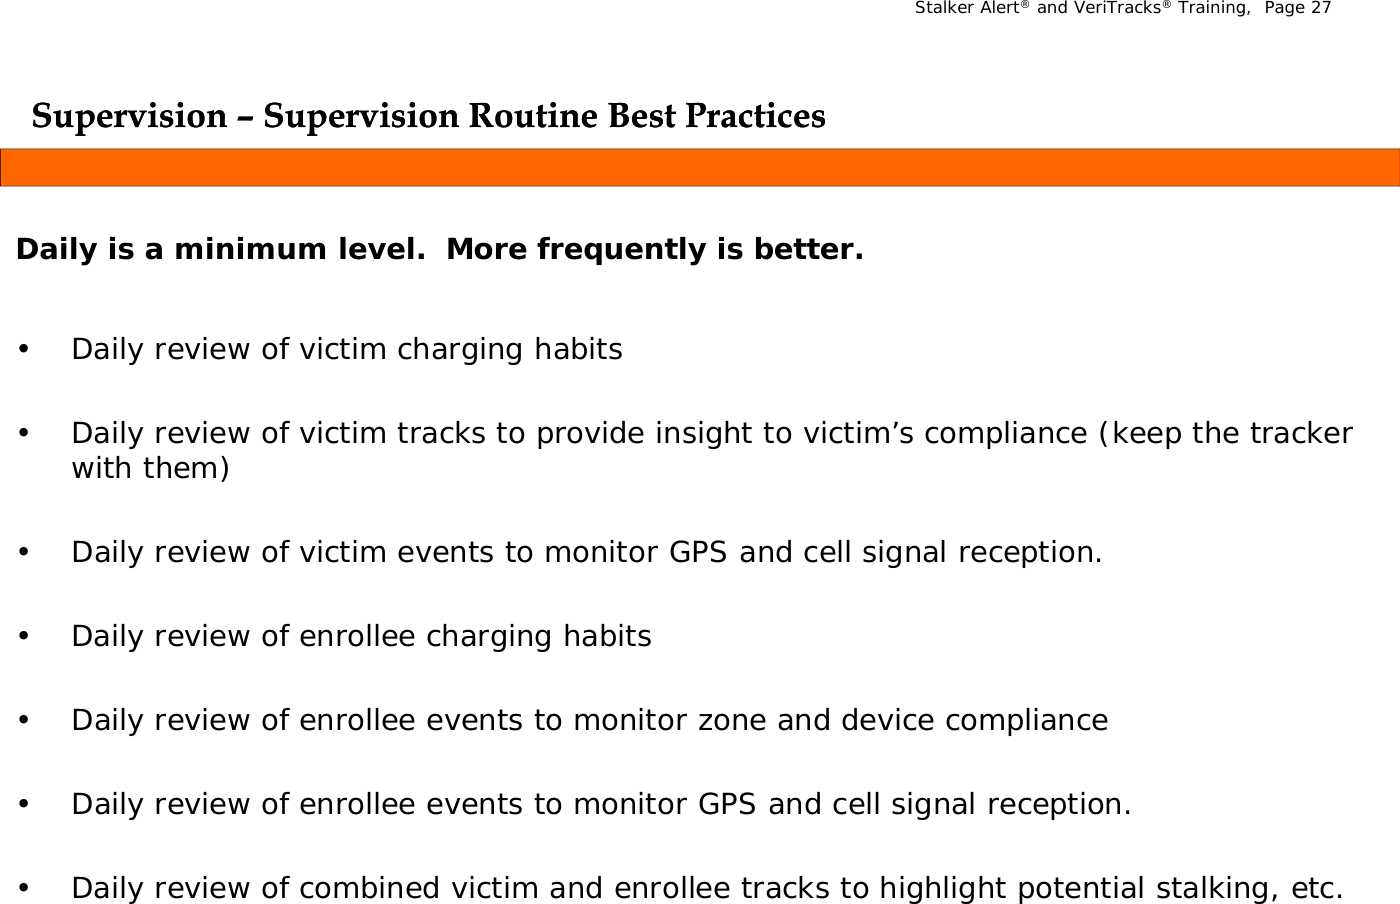 Stalker Alert®and VeriTracks®Training,  Page 27Supervision Supervision ––Supervision Routine Best PracticesSupervision Routine Best PracticesppppDaily is a minimum level. More frequently is better.• Daily review of victim charging habits • Daily review of victim tracks to provide insight to victim’s compliance (keep the tracker with them) • Daily review of victim events to monitor GPS and cell signal reception. • Daily review of enrollee charging habits • Daily review of enrollee events to monitor zone and device compliance • Daily review of enrollee events to monitor GPS and cell signal reception. • Daily review of combined victim and enrollee tracks to highlight potential stalking, etc. 